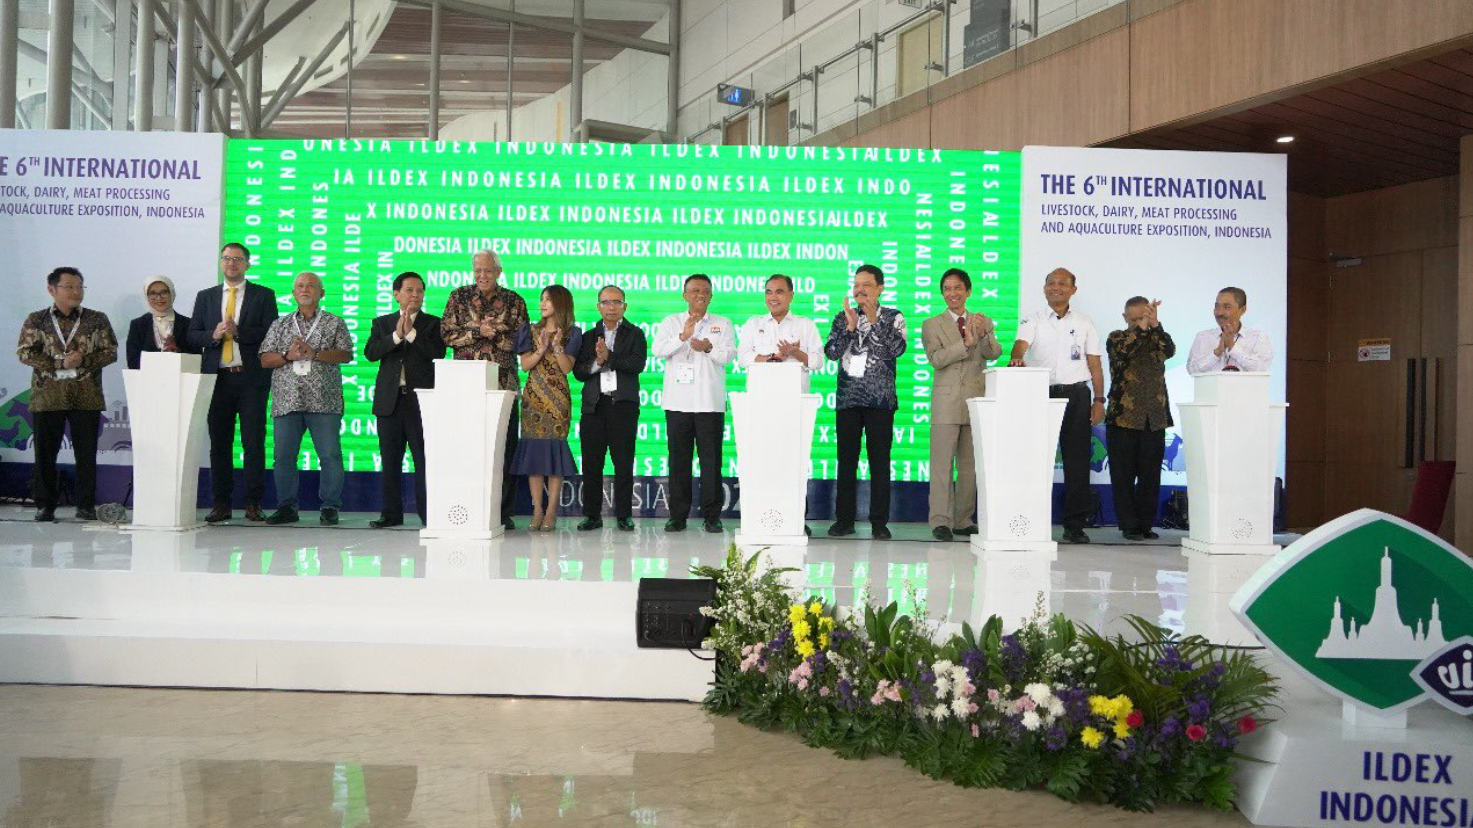 The 6th International Livestock, Dairy, Meat Processing, and Aquaculture Exposition (ILDEX) Indonesia 2023